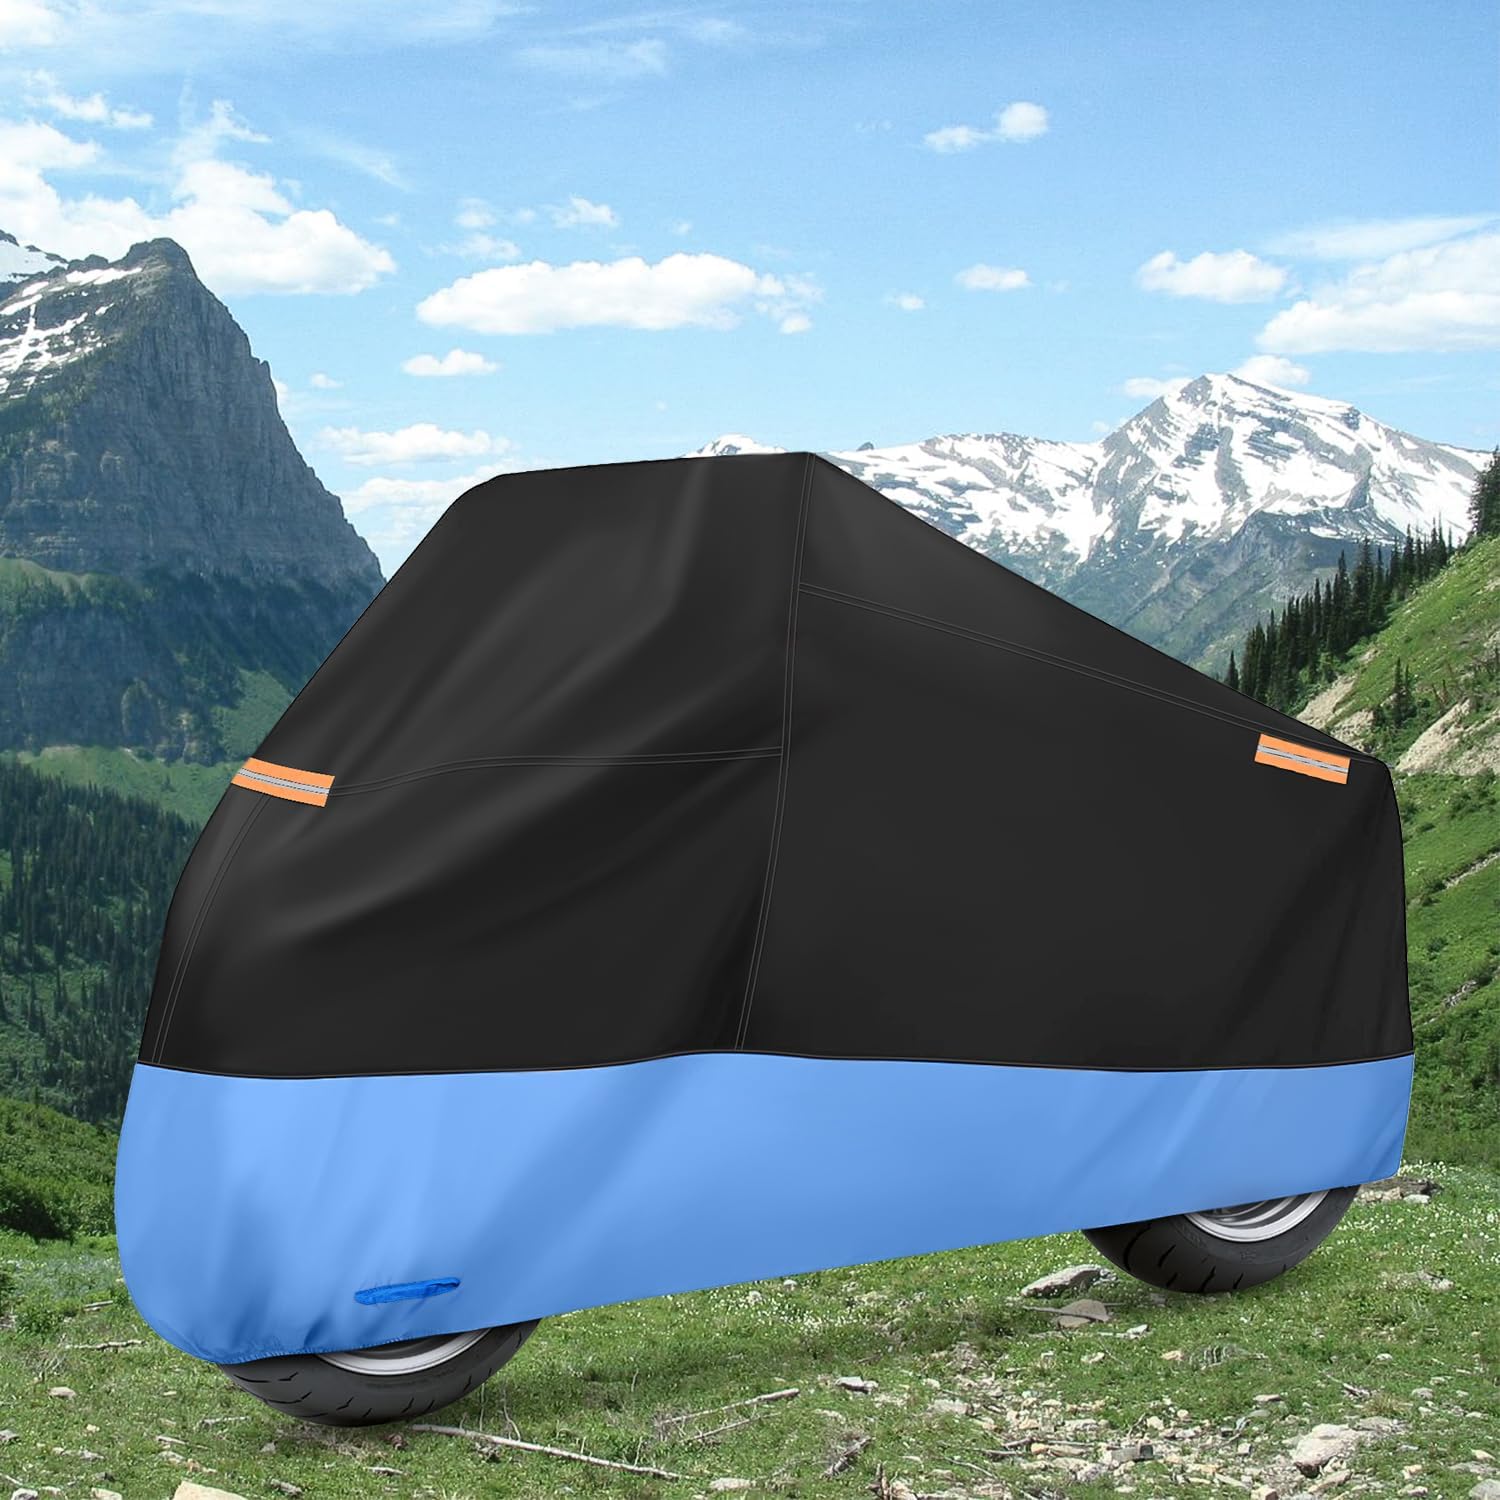 Motorcycle Cover with Lock-Hole Storage Bag & Protective Reflective Strip Fits up to 108" Nilight